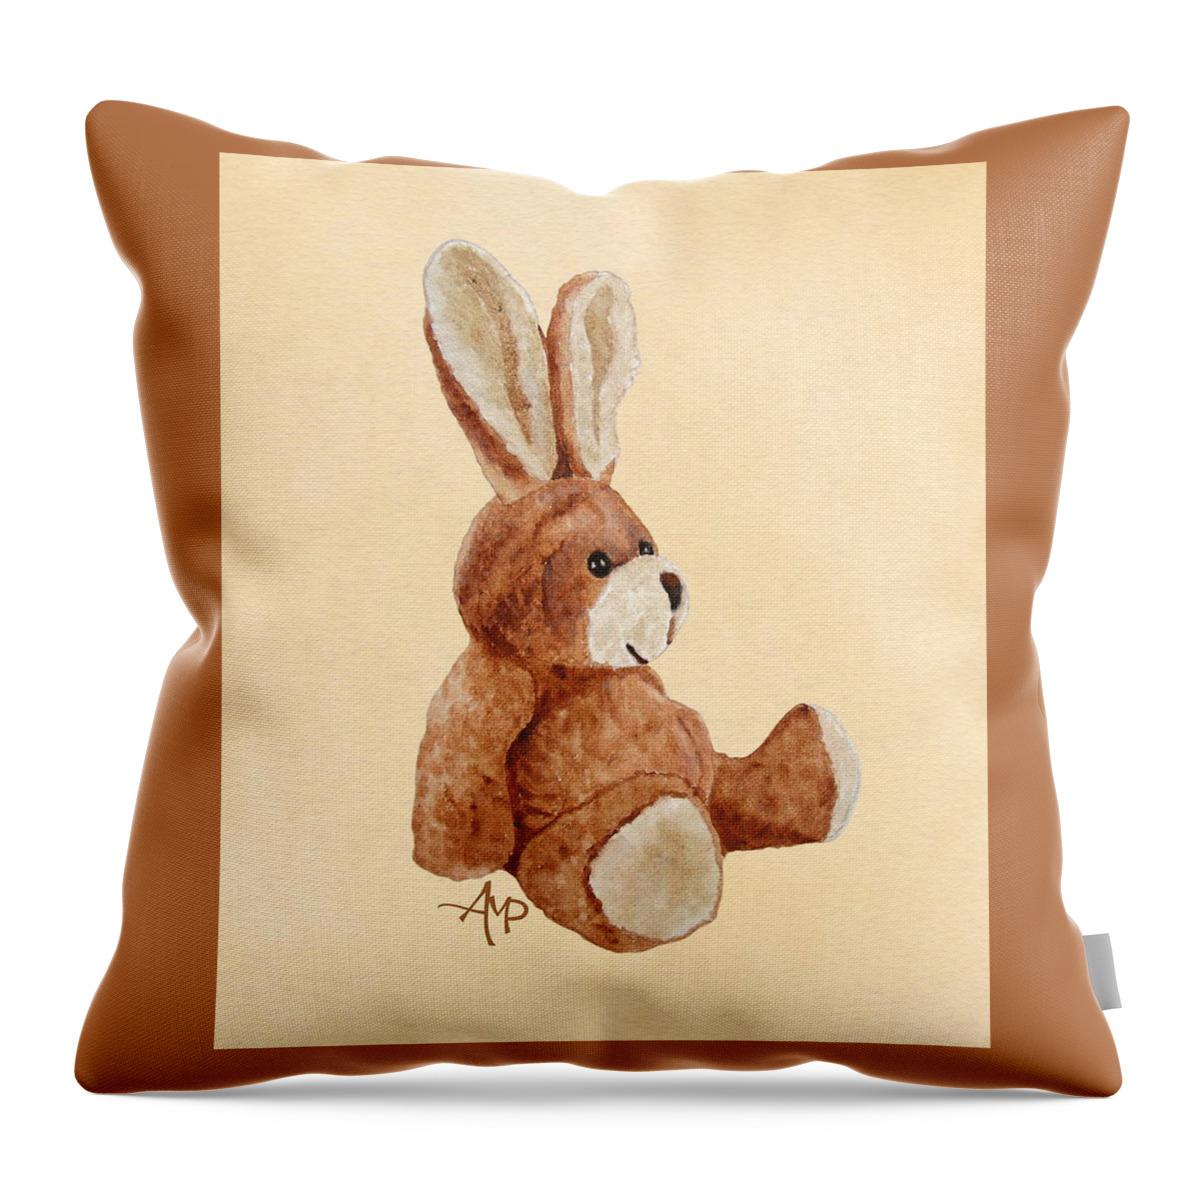 Cuddly Rabbit Throw Pillow featuring the painting Cuddly Rabbit by Angeles M Pomata